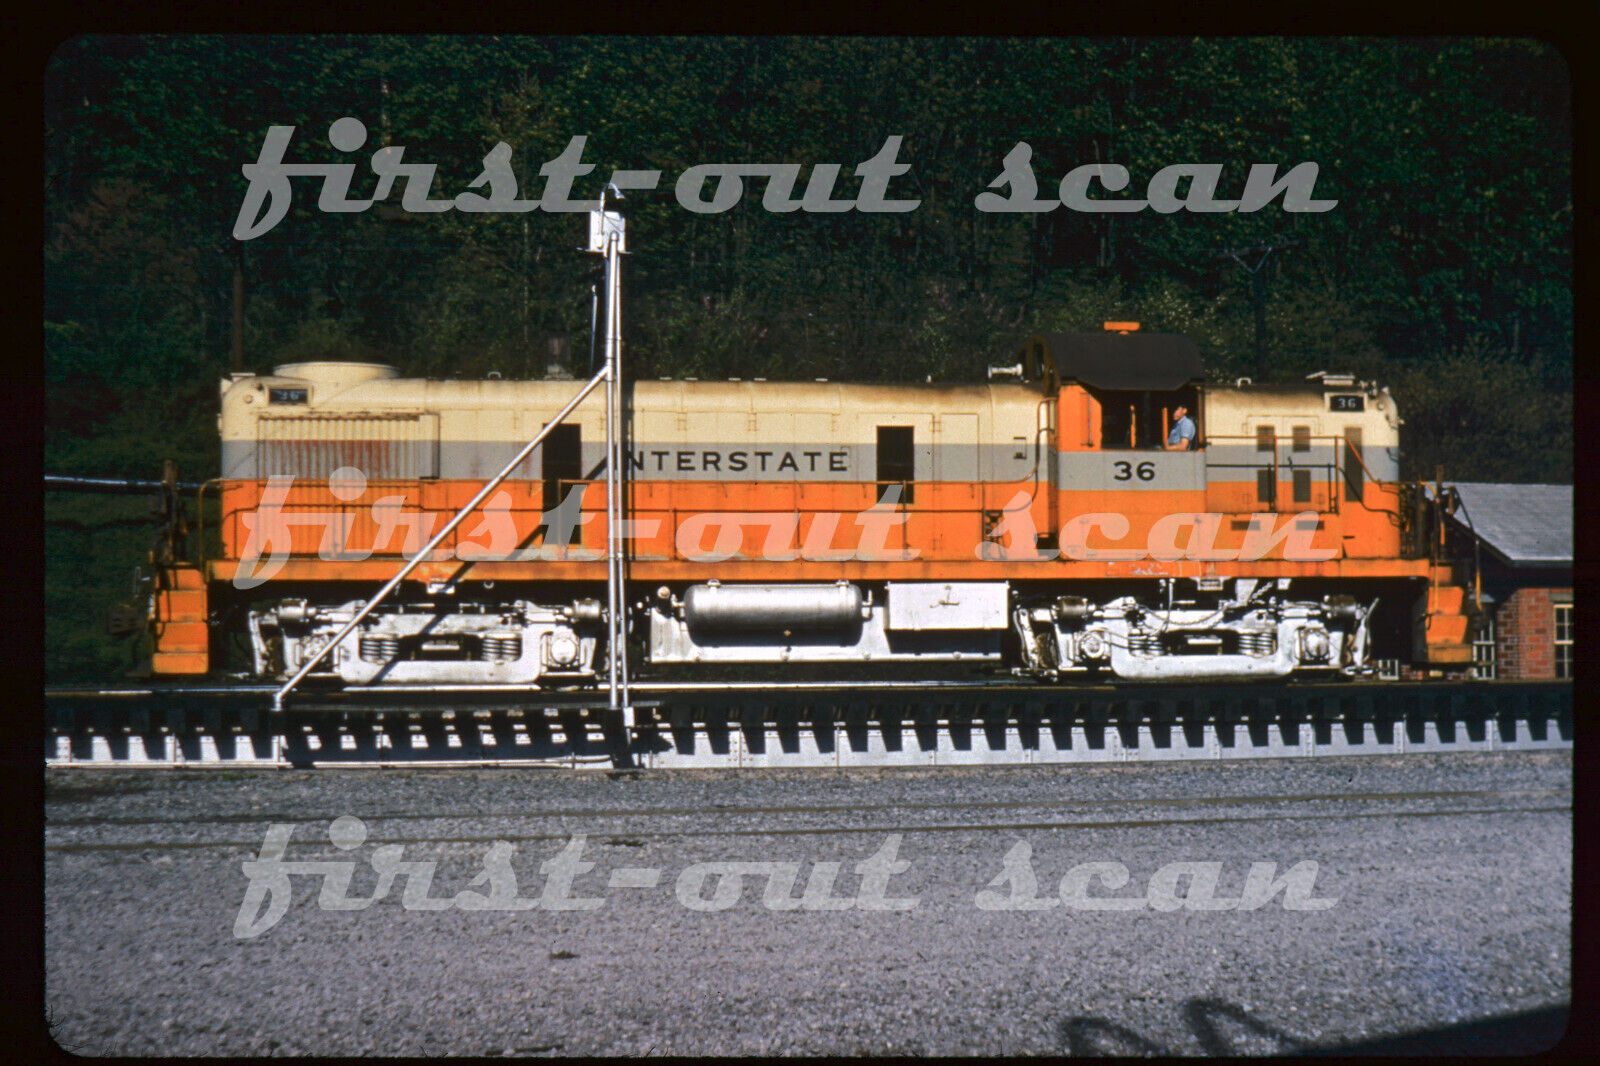 R DUPLICATE SLIDE - Interstate 36 ALCO RS-3 on Turntable